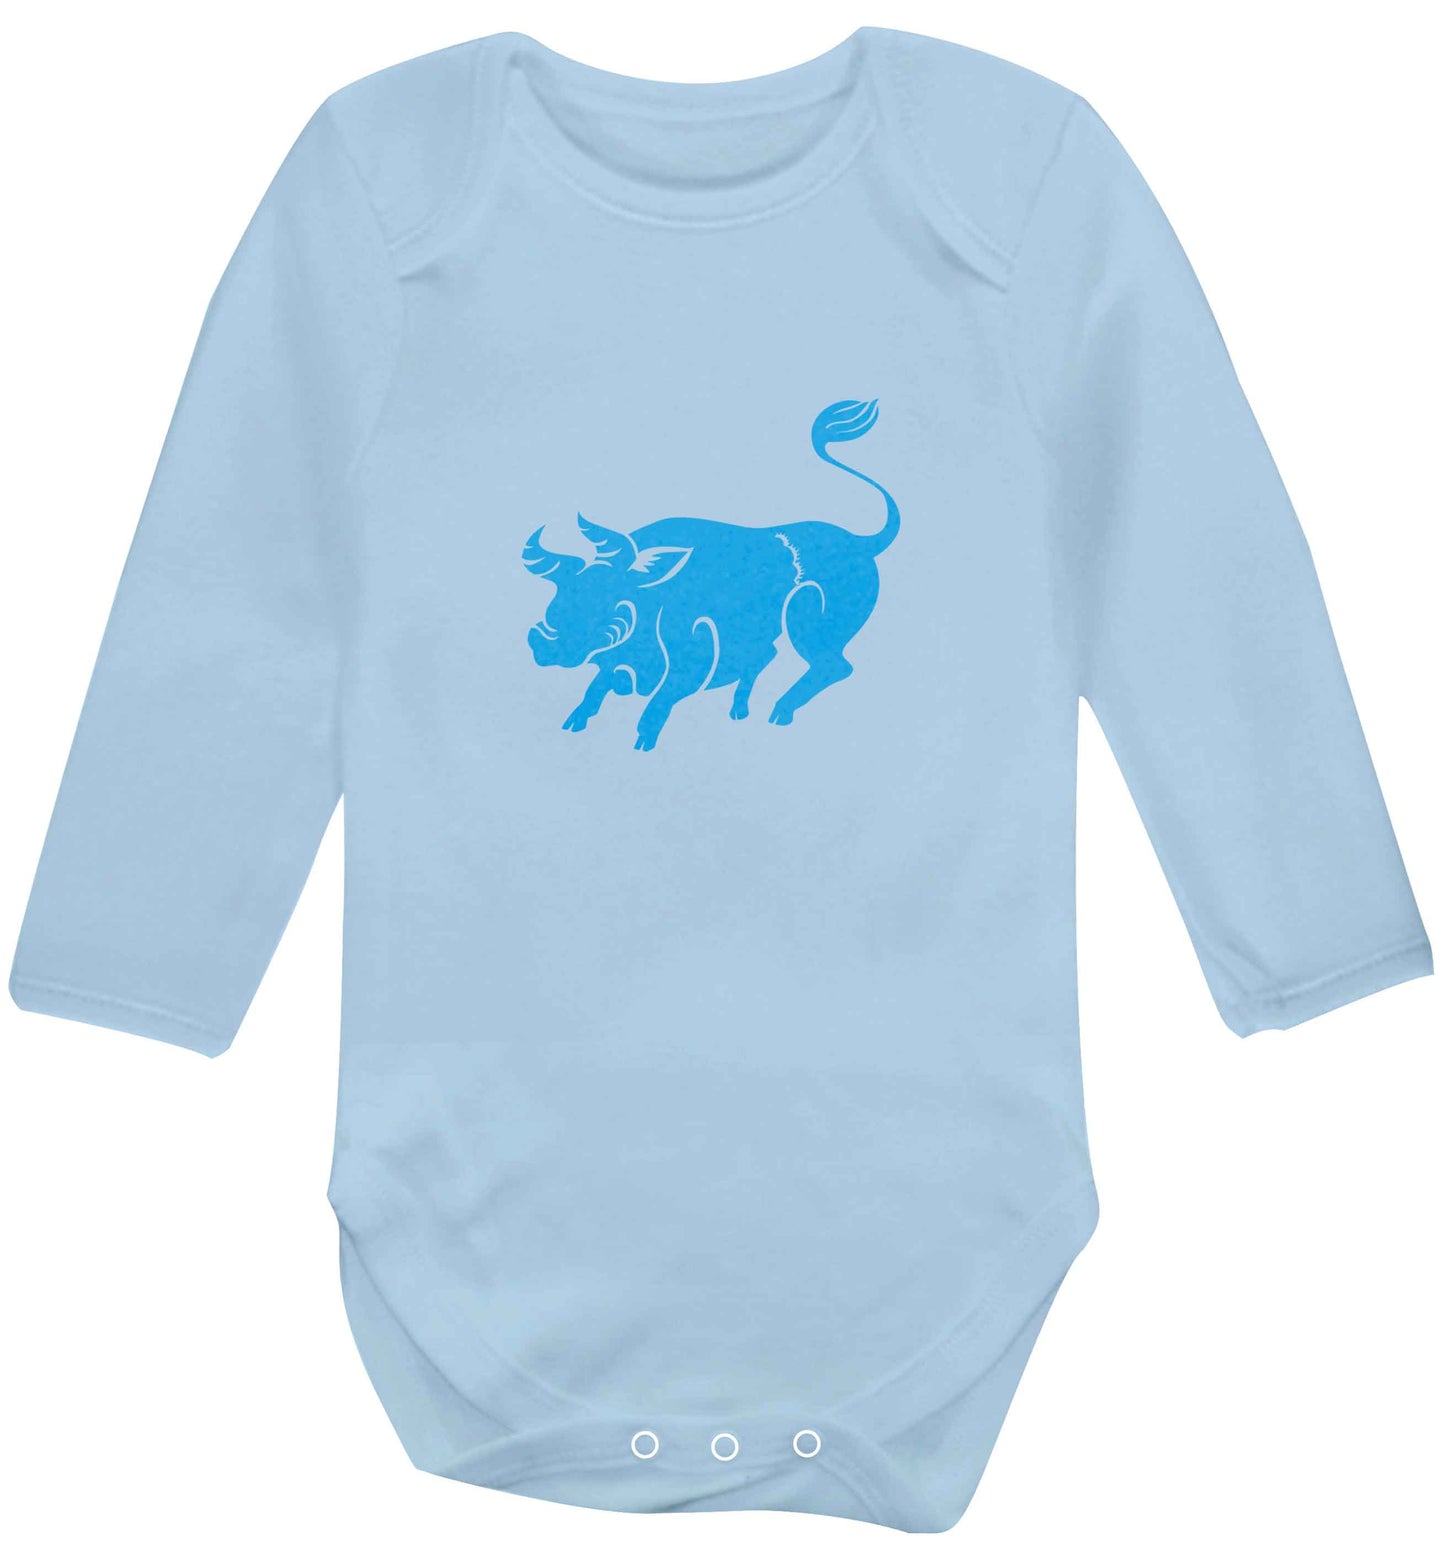 Blue ox baby vest long sleeved pale blue 6-12 months